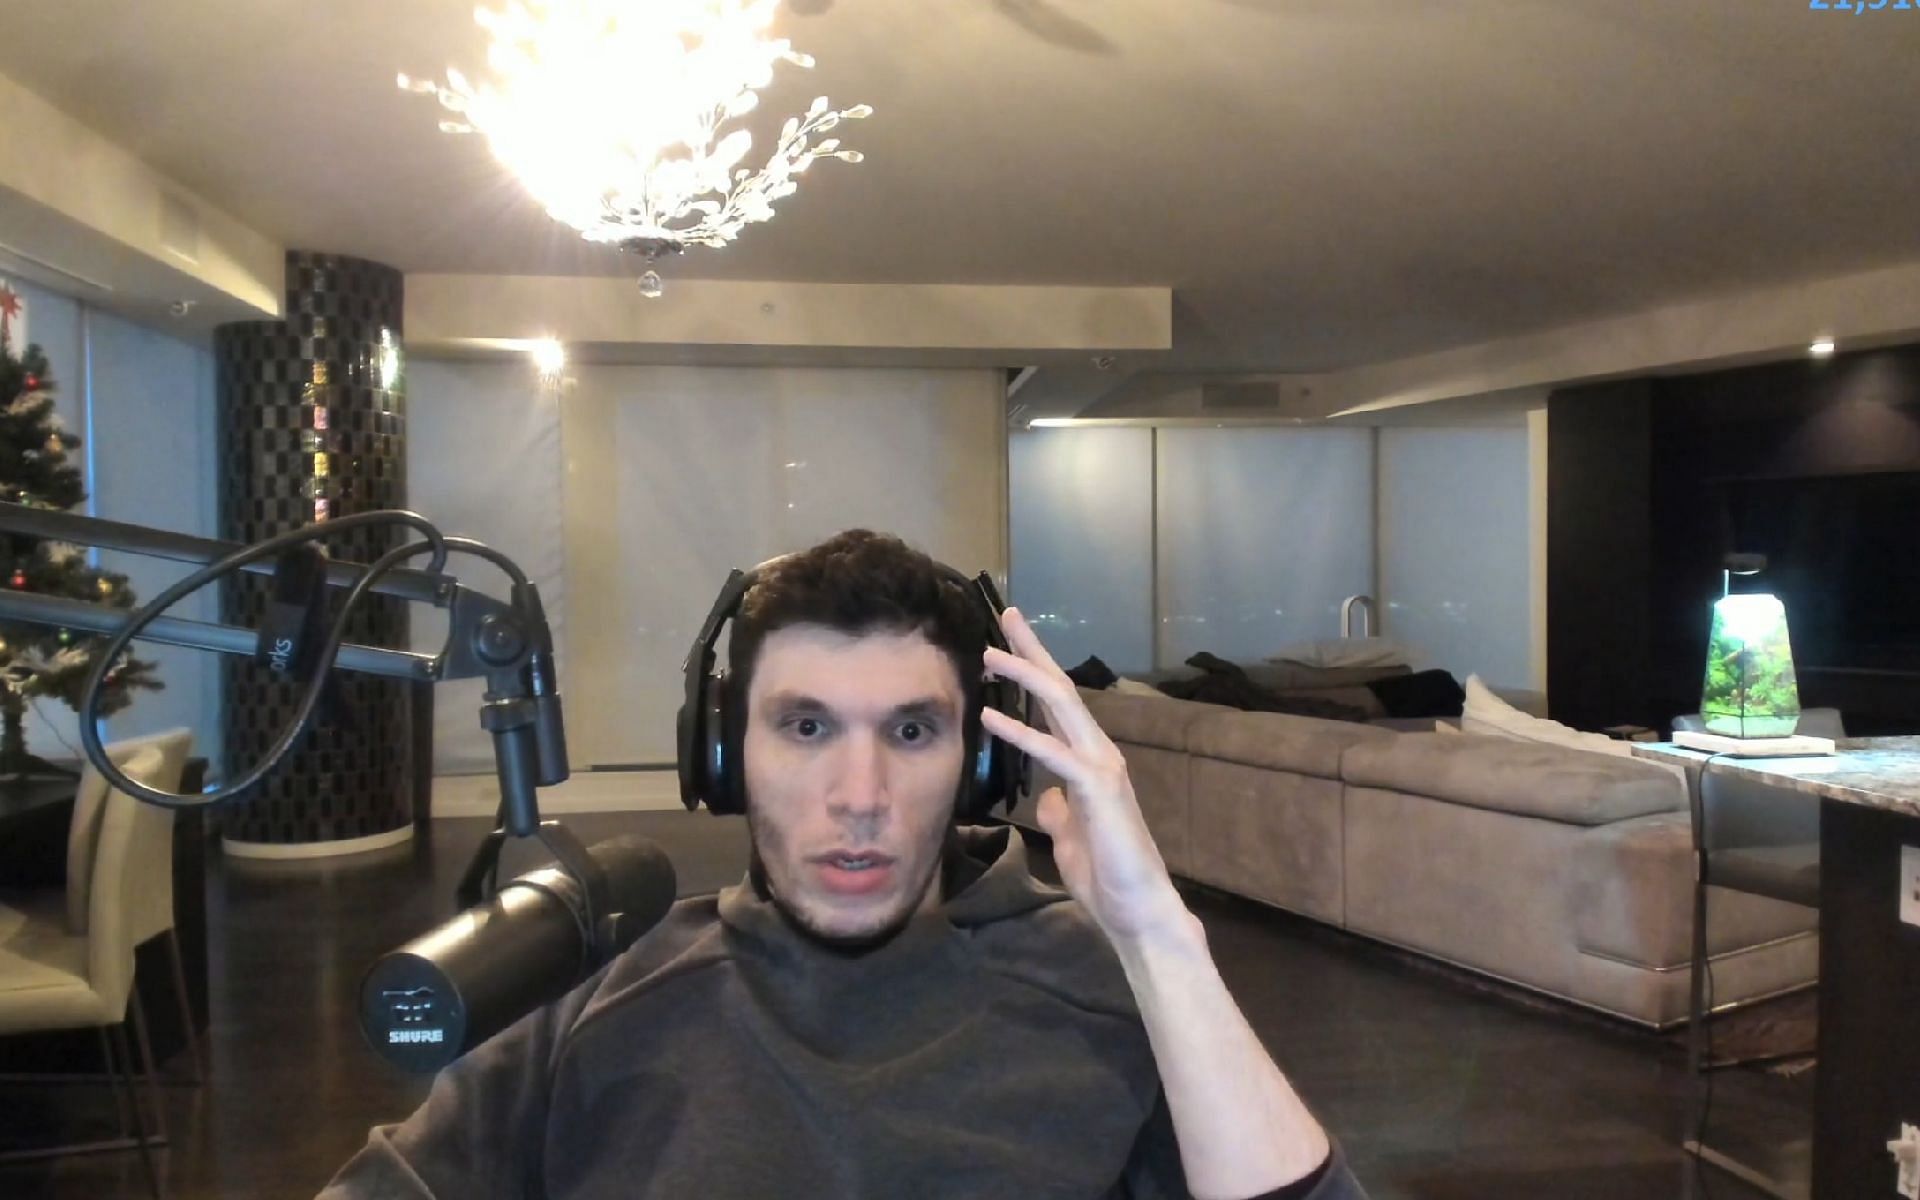 Trainwreckstv talked about his upcoming livestreaming platform during his October 25 broadcast (Image via Trainwreckstv/Twitch)